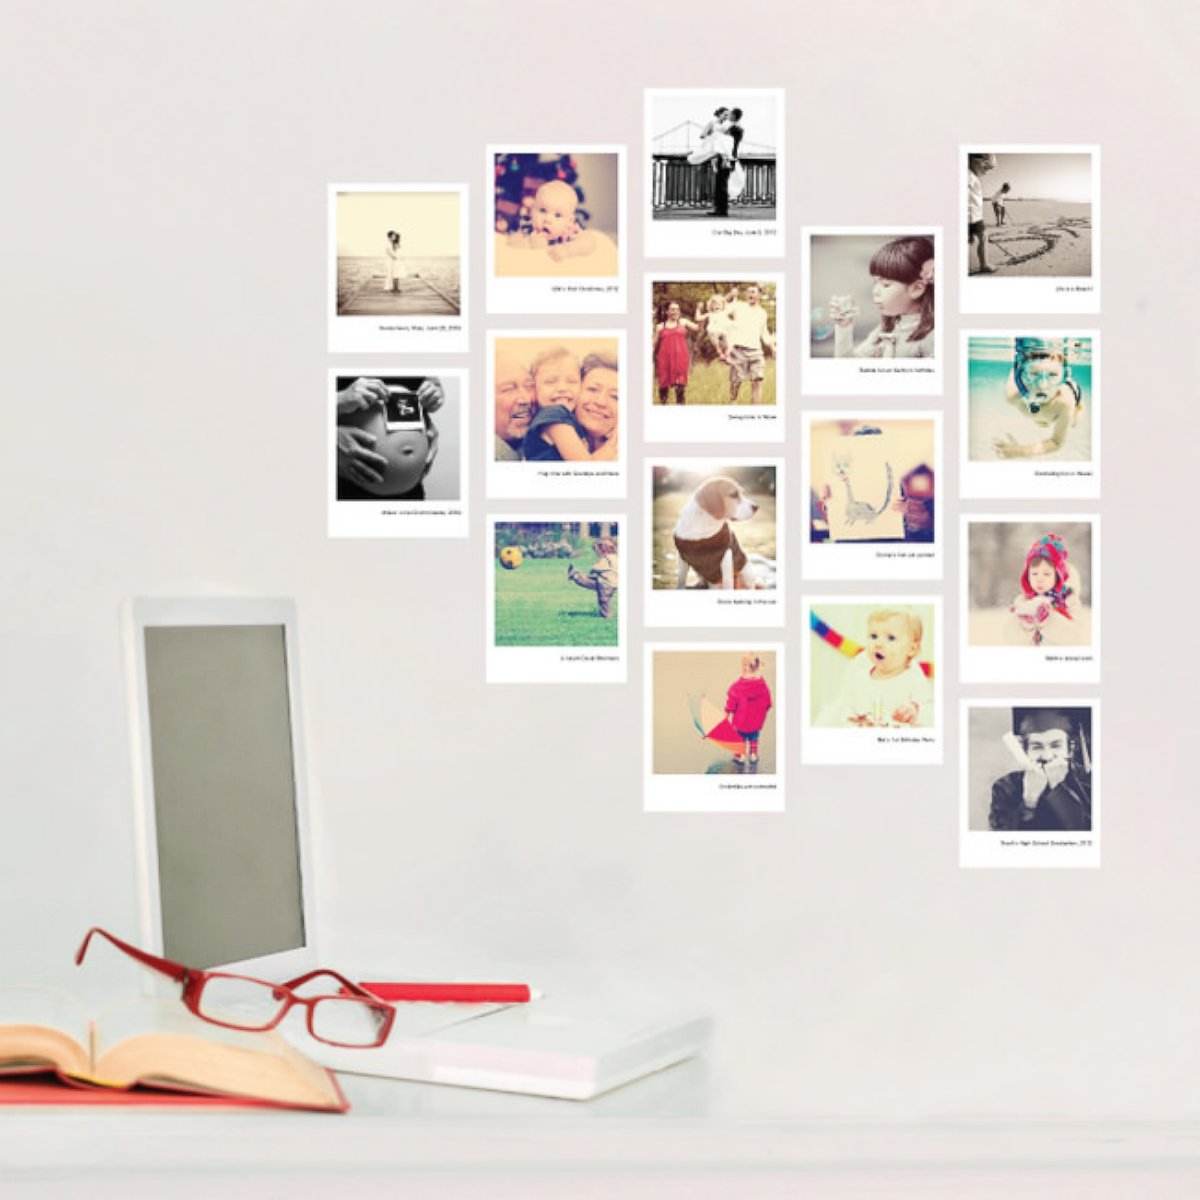 PHOTO: The perfect gift for Gram: A wall gallery of her best Instagram photos.